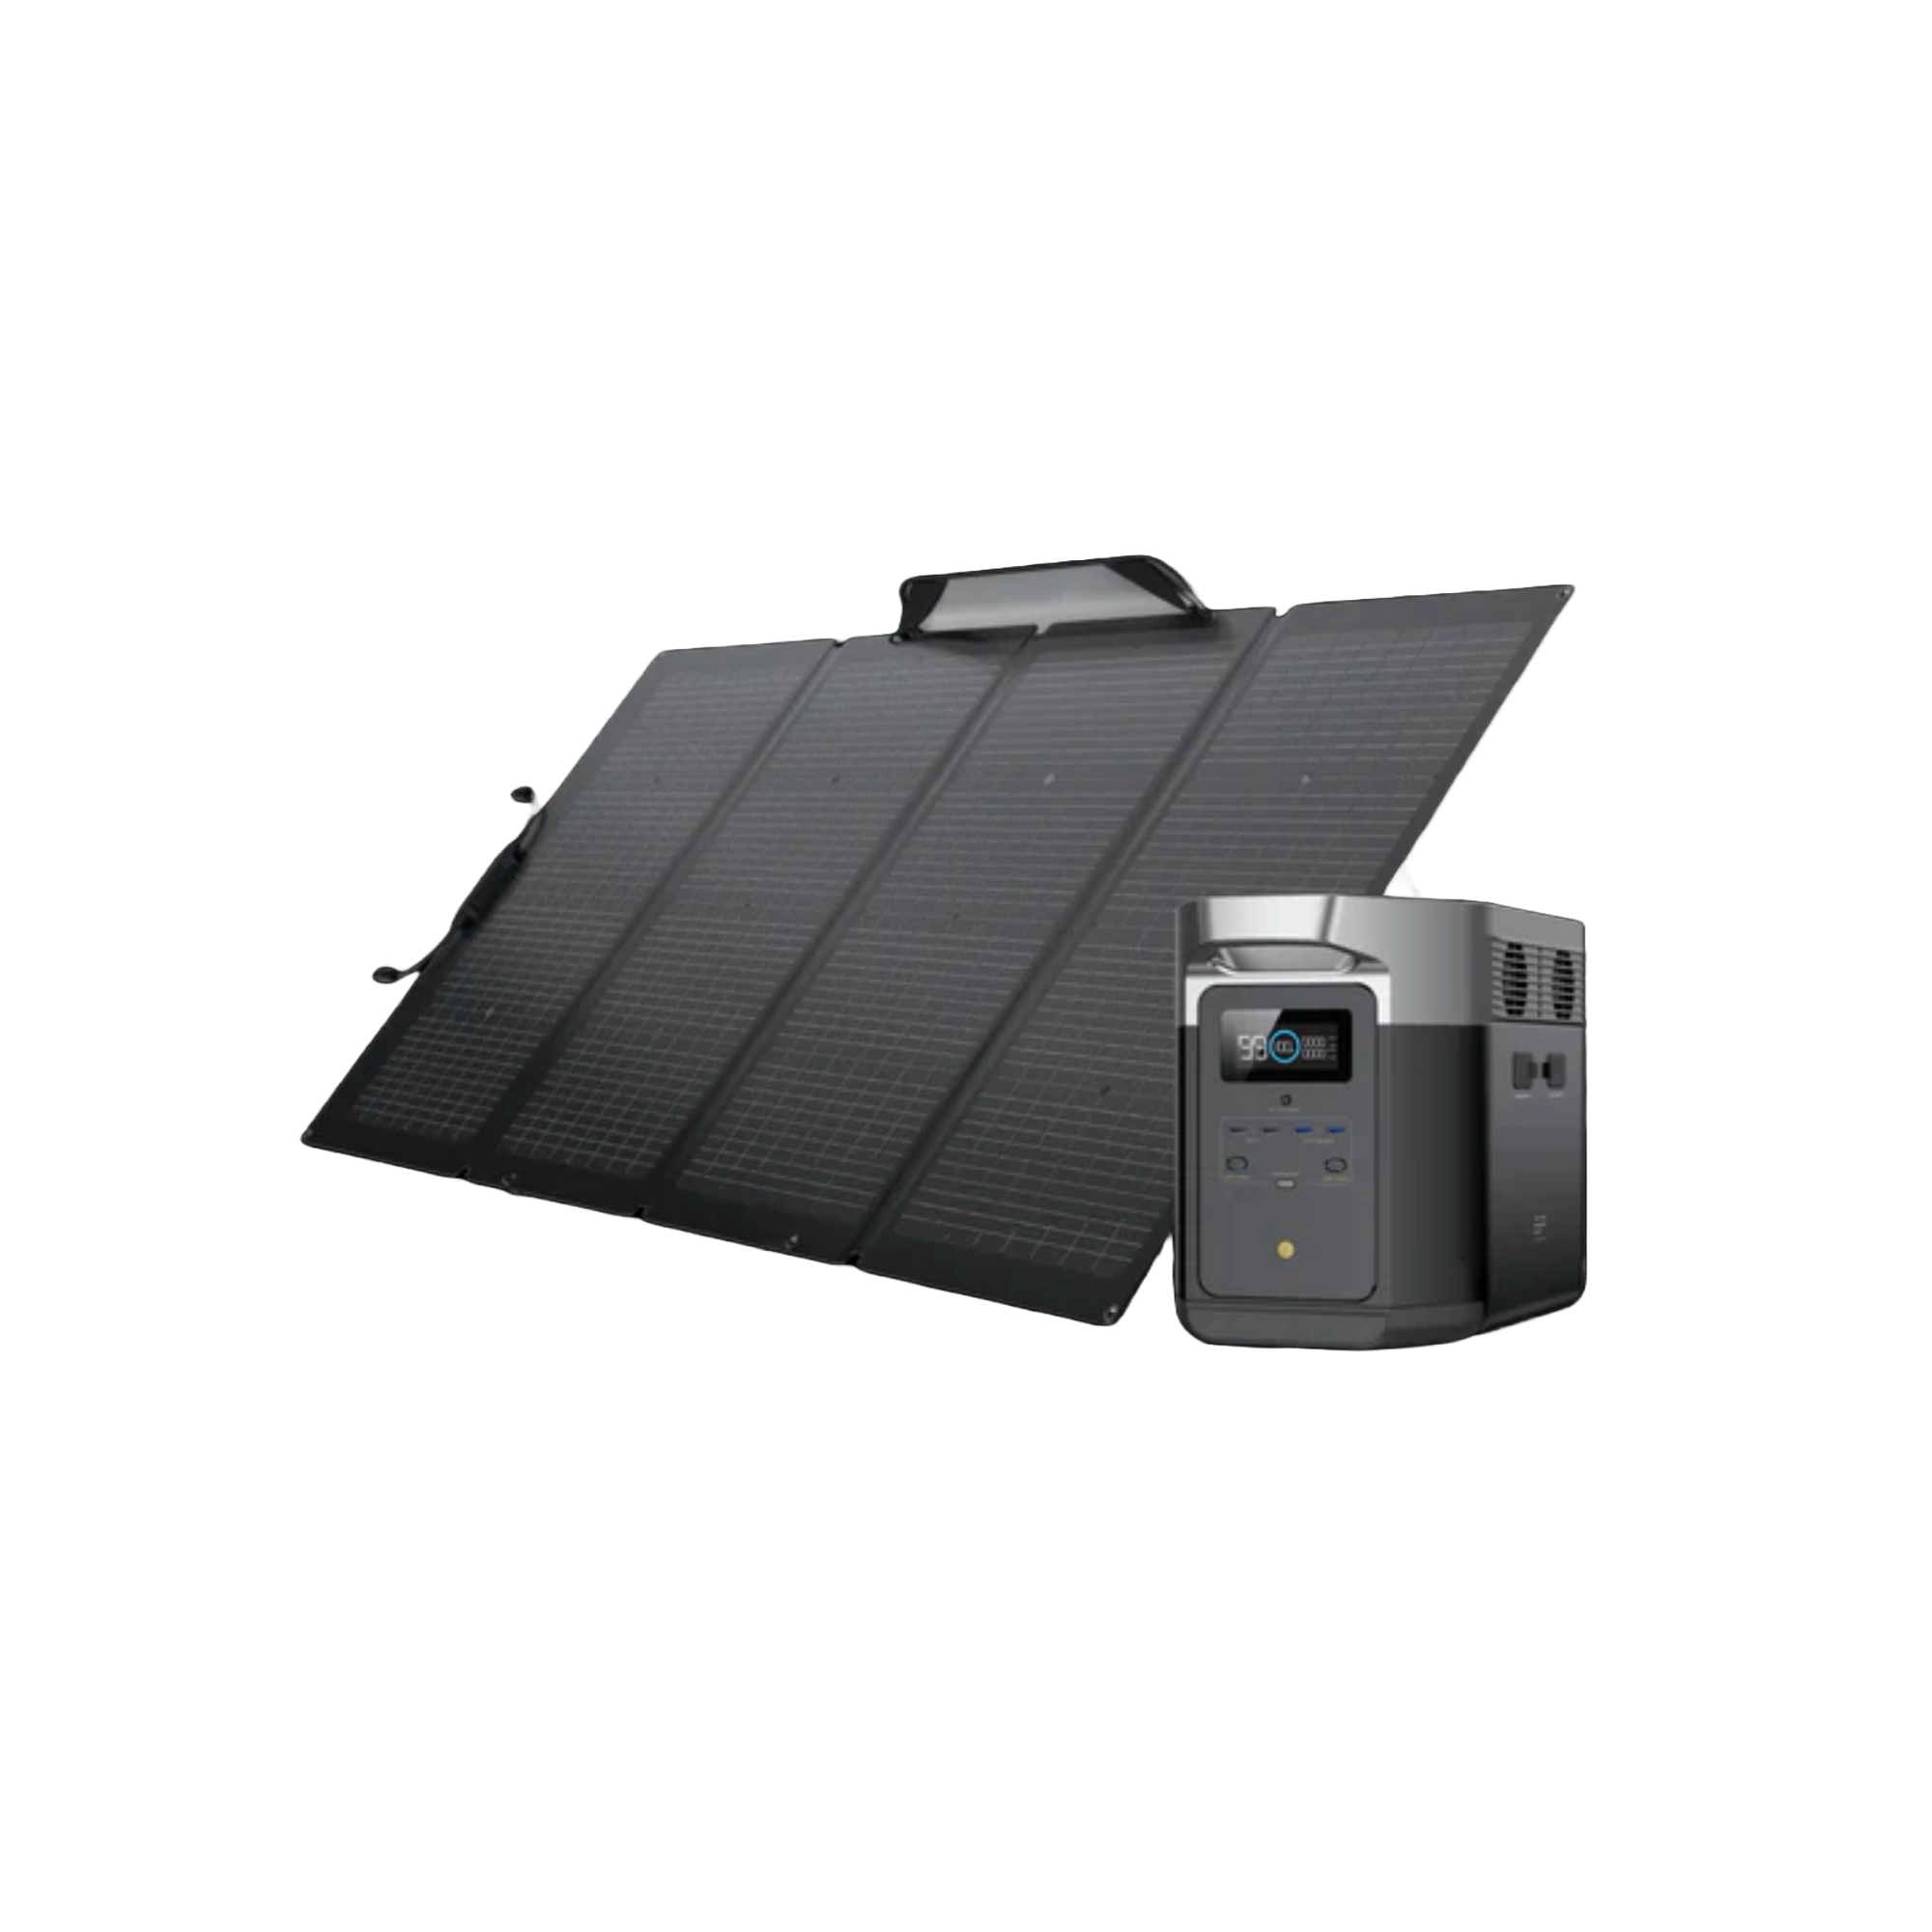 EcoFlow DELTA Max 1600 Portable Power Station with 220W Solar Panels